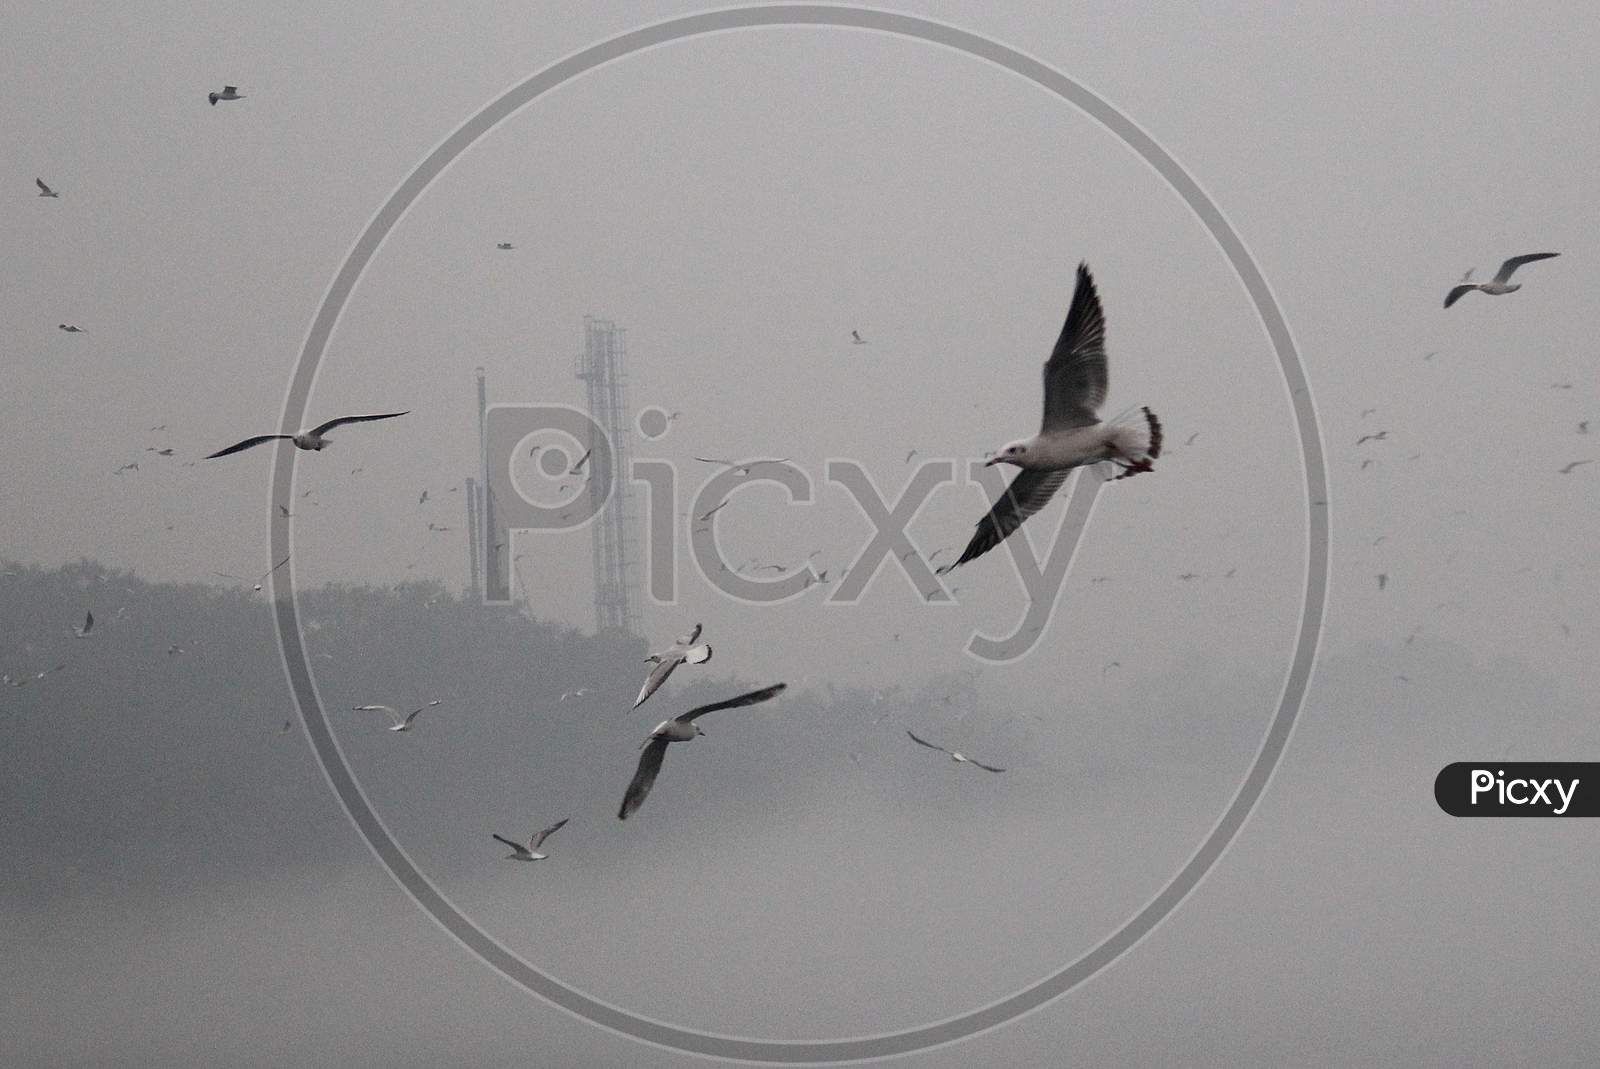 A flock of seagulls fly over the Yamuna river on a smoggy morning in New Delhi, November 9, 2020.